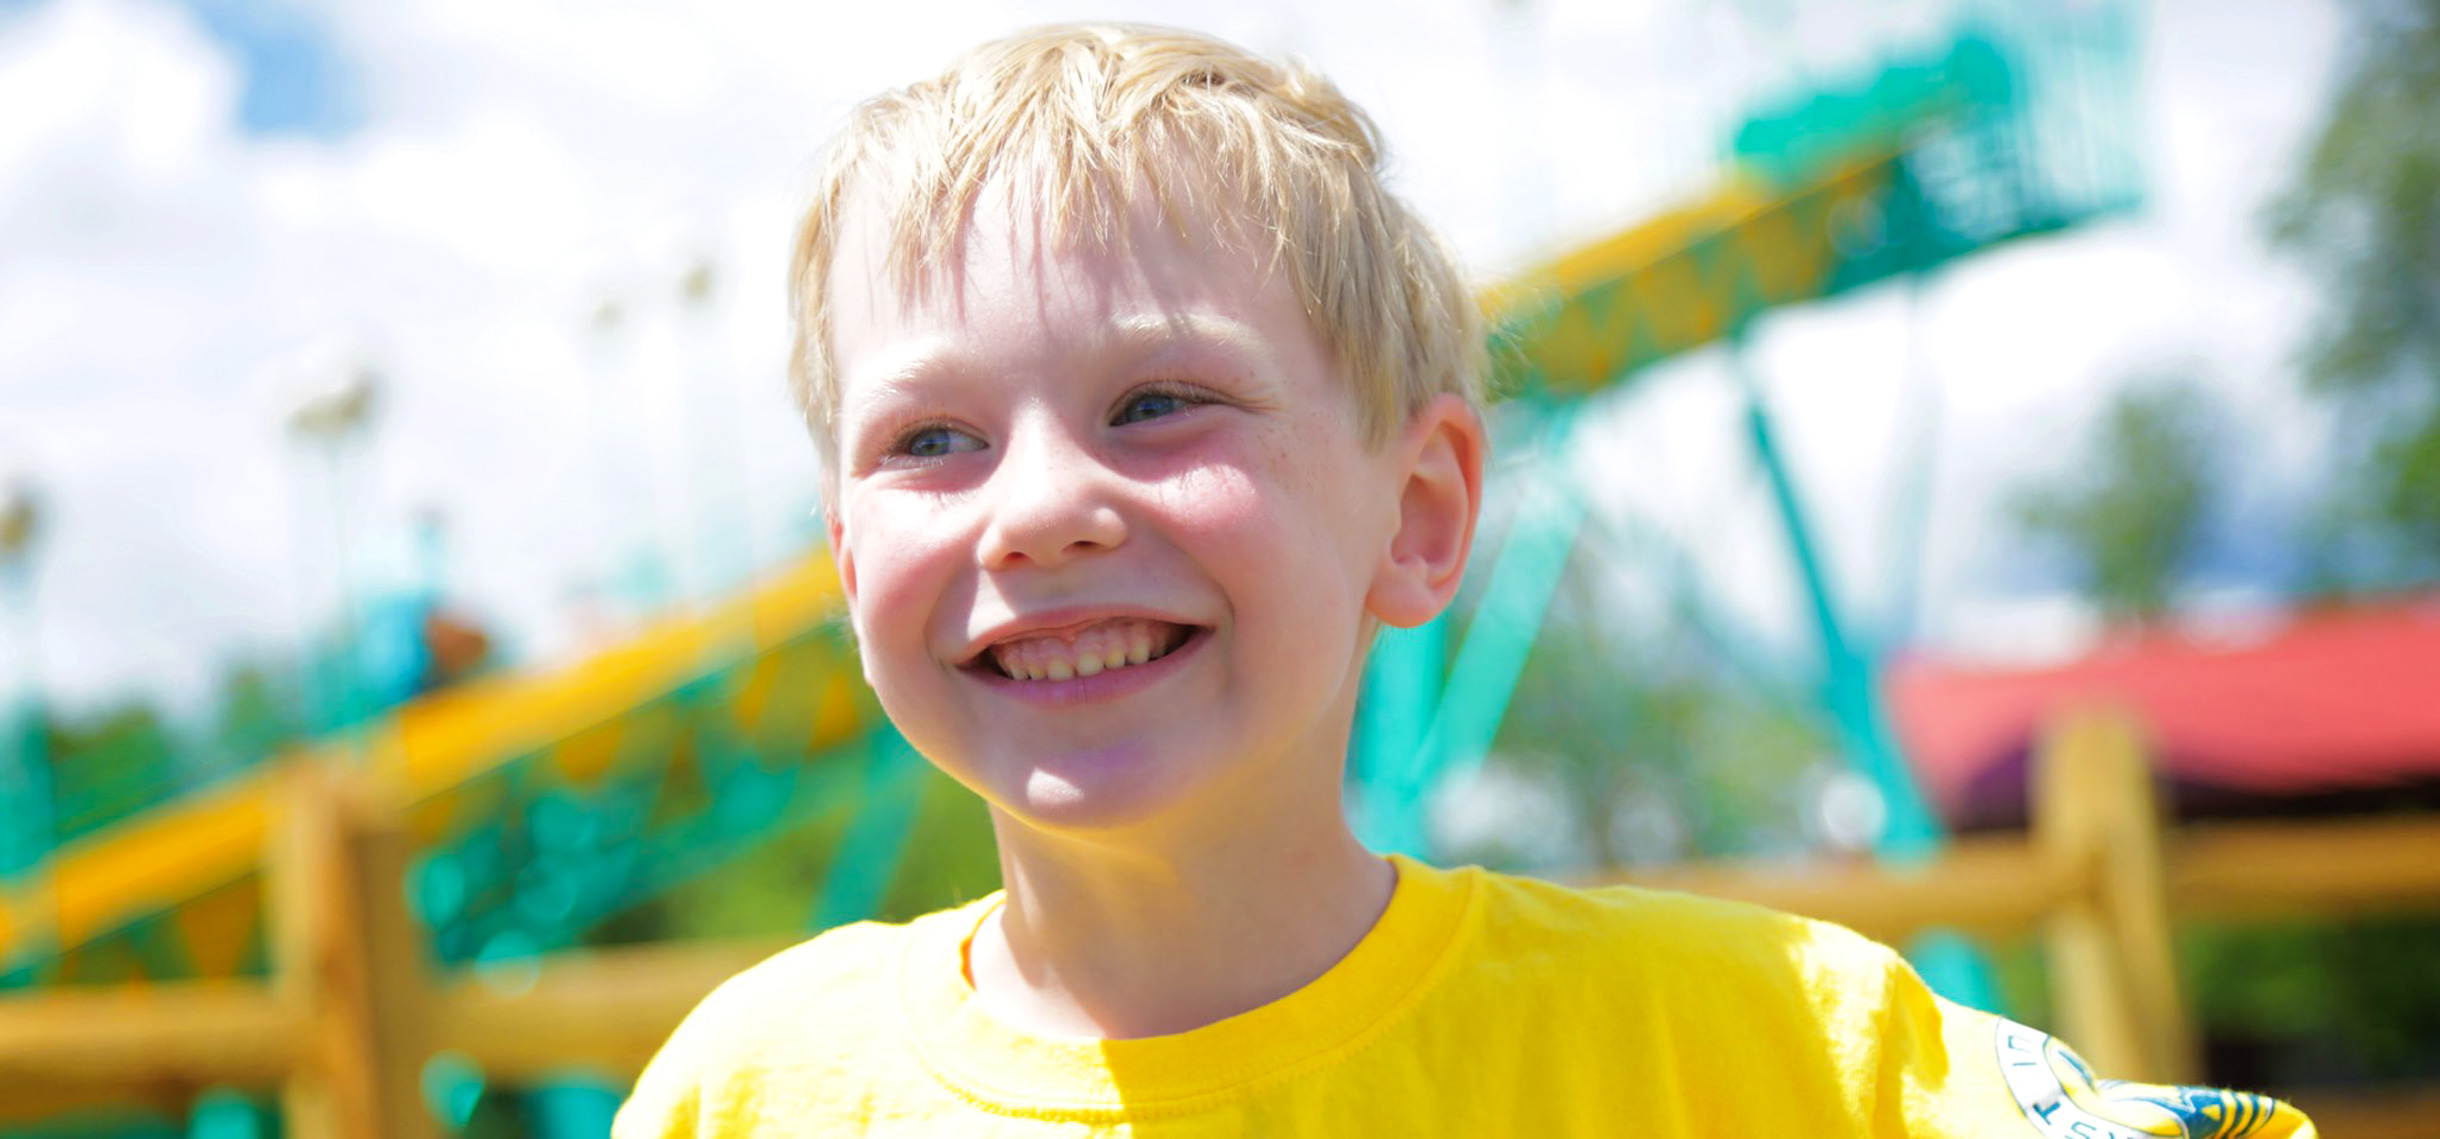 Young boy camper with yellow shirt smiling